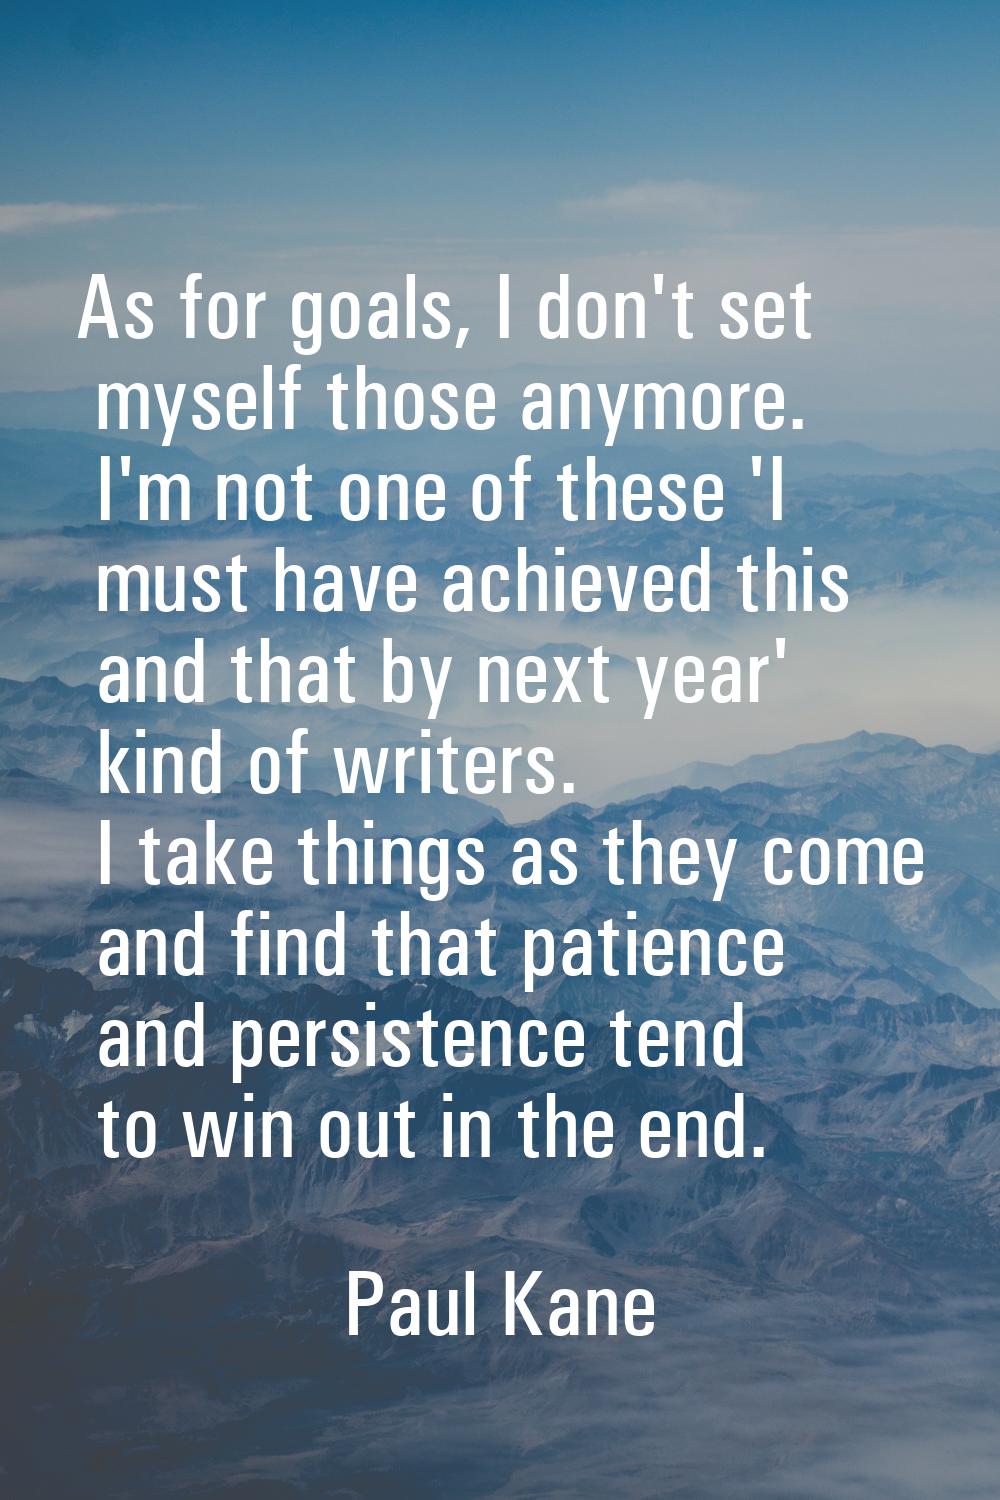 As for goals, I don't set myself those anymore. I'm not one of these 'I must have achieved this and